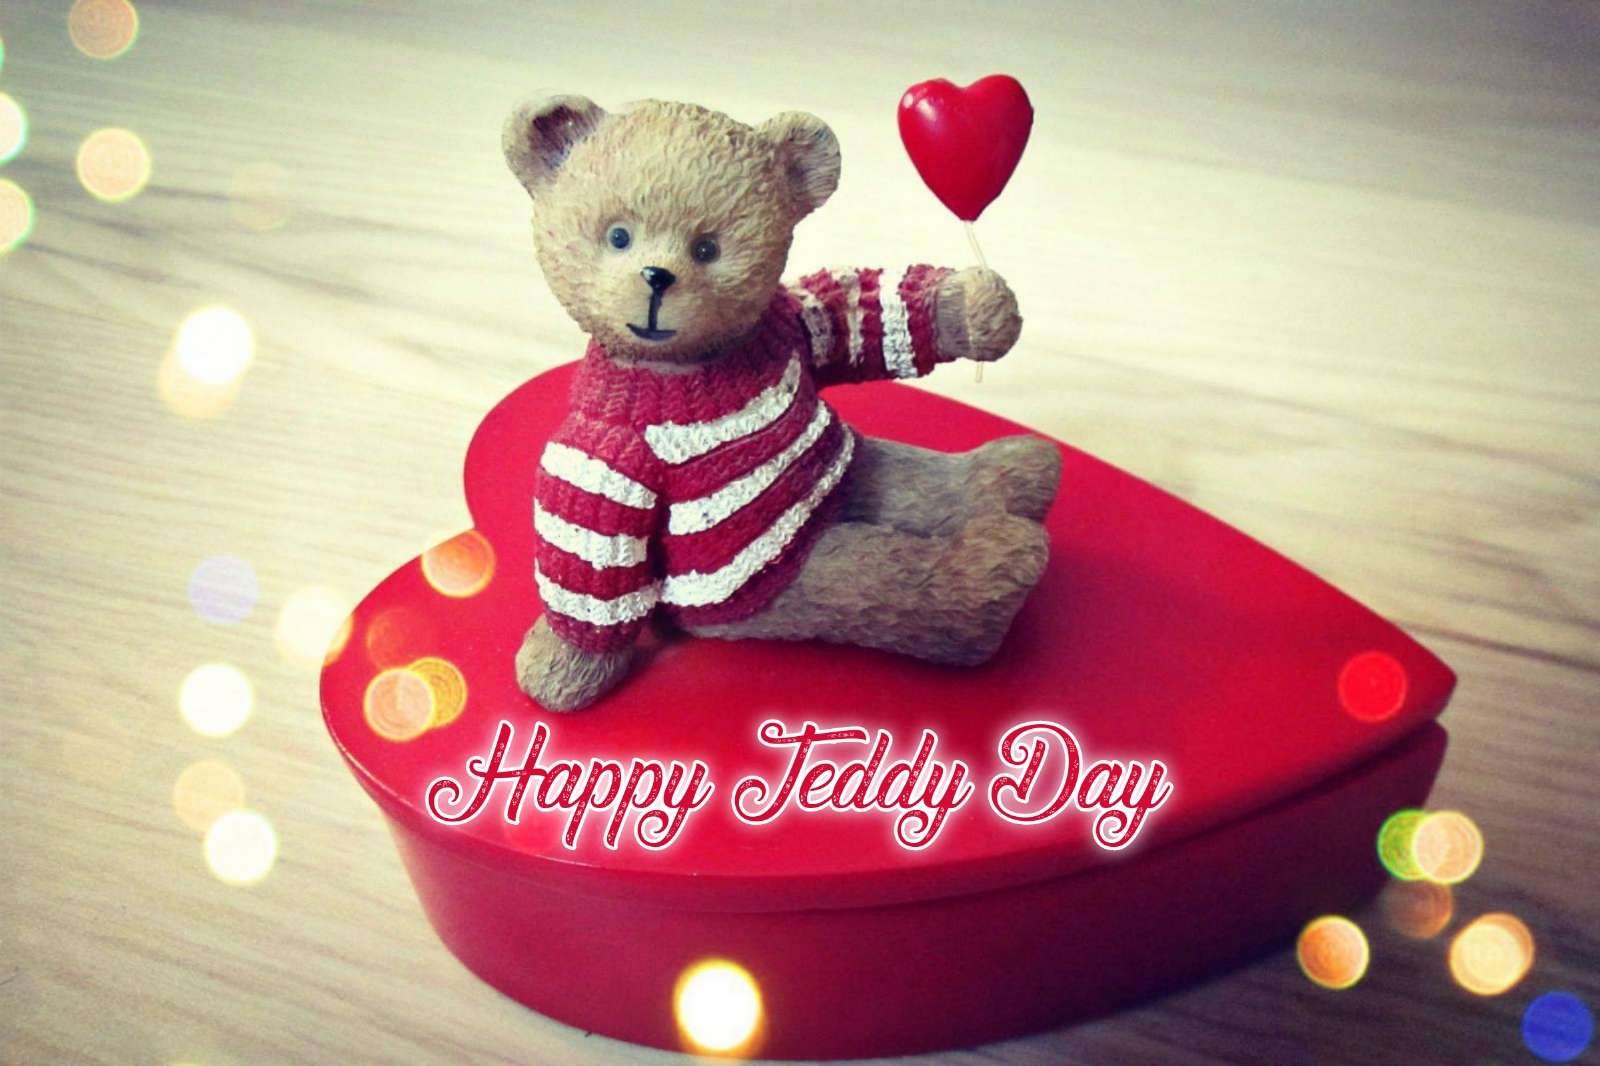 Happy Teddy Day Images 2022 Download